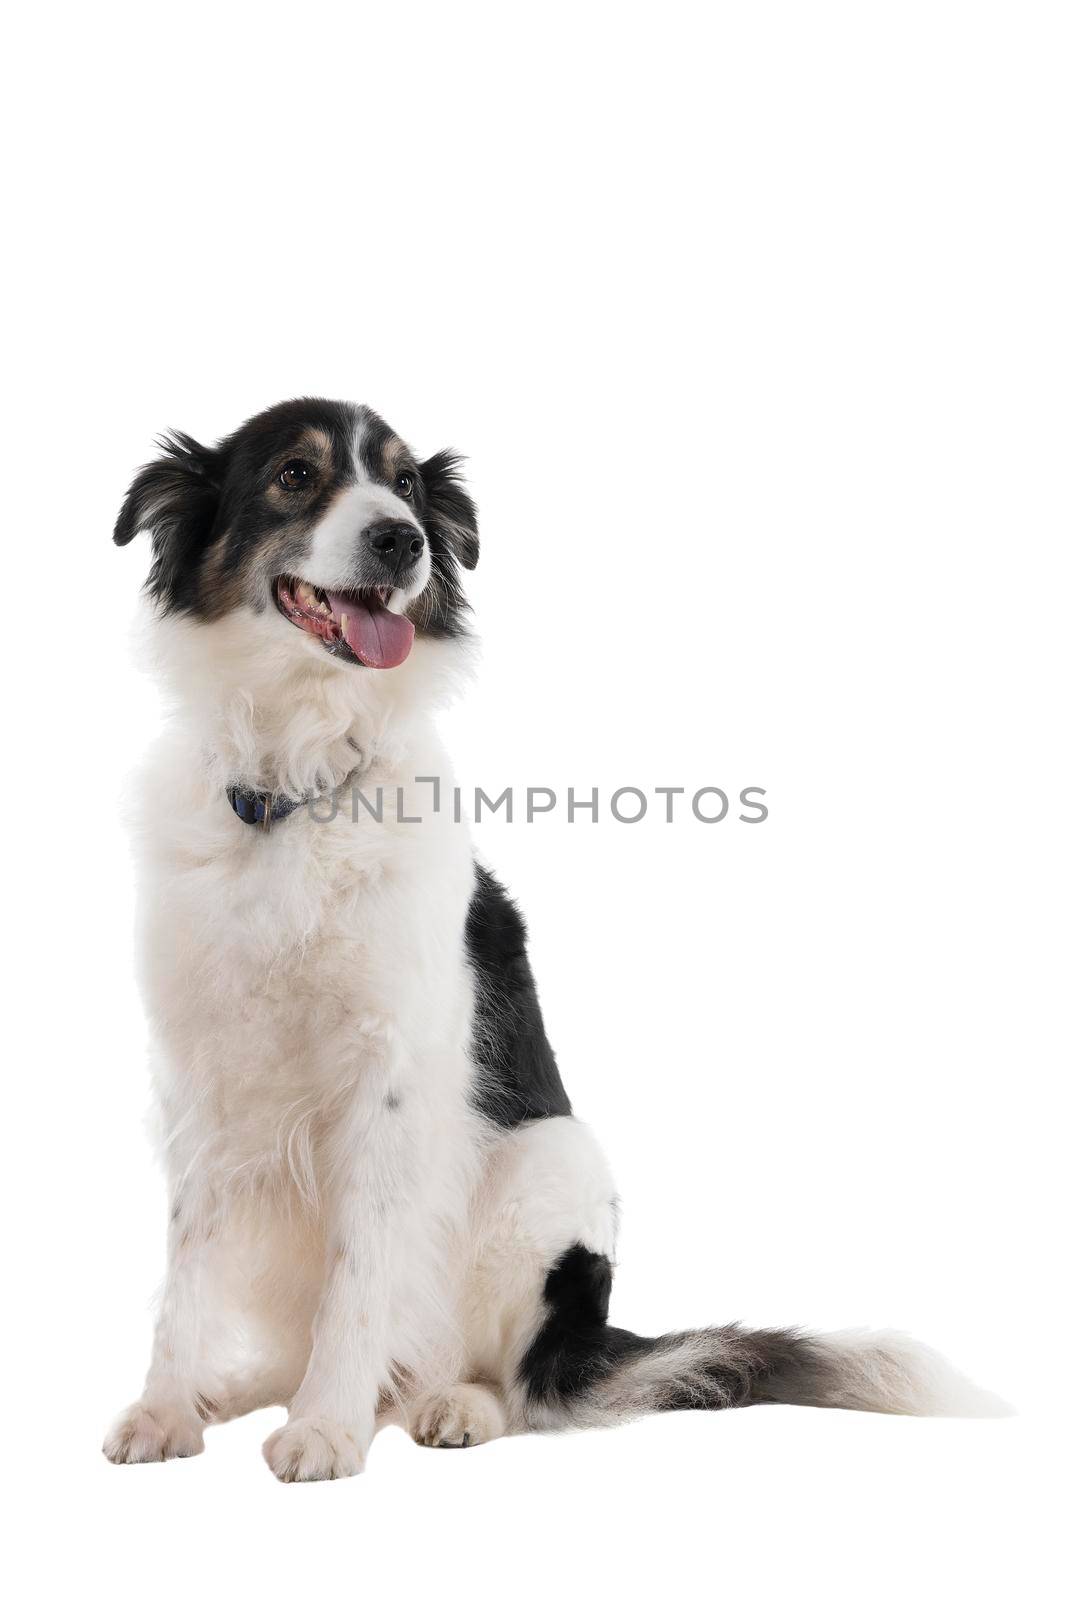 Black and white Australian Shepherd dog sitting isolated in white background  looking front view